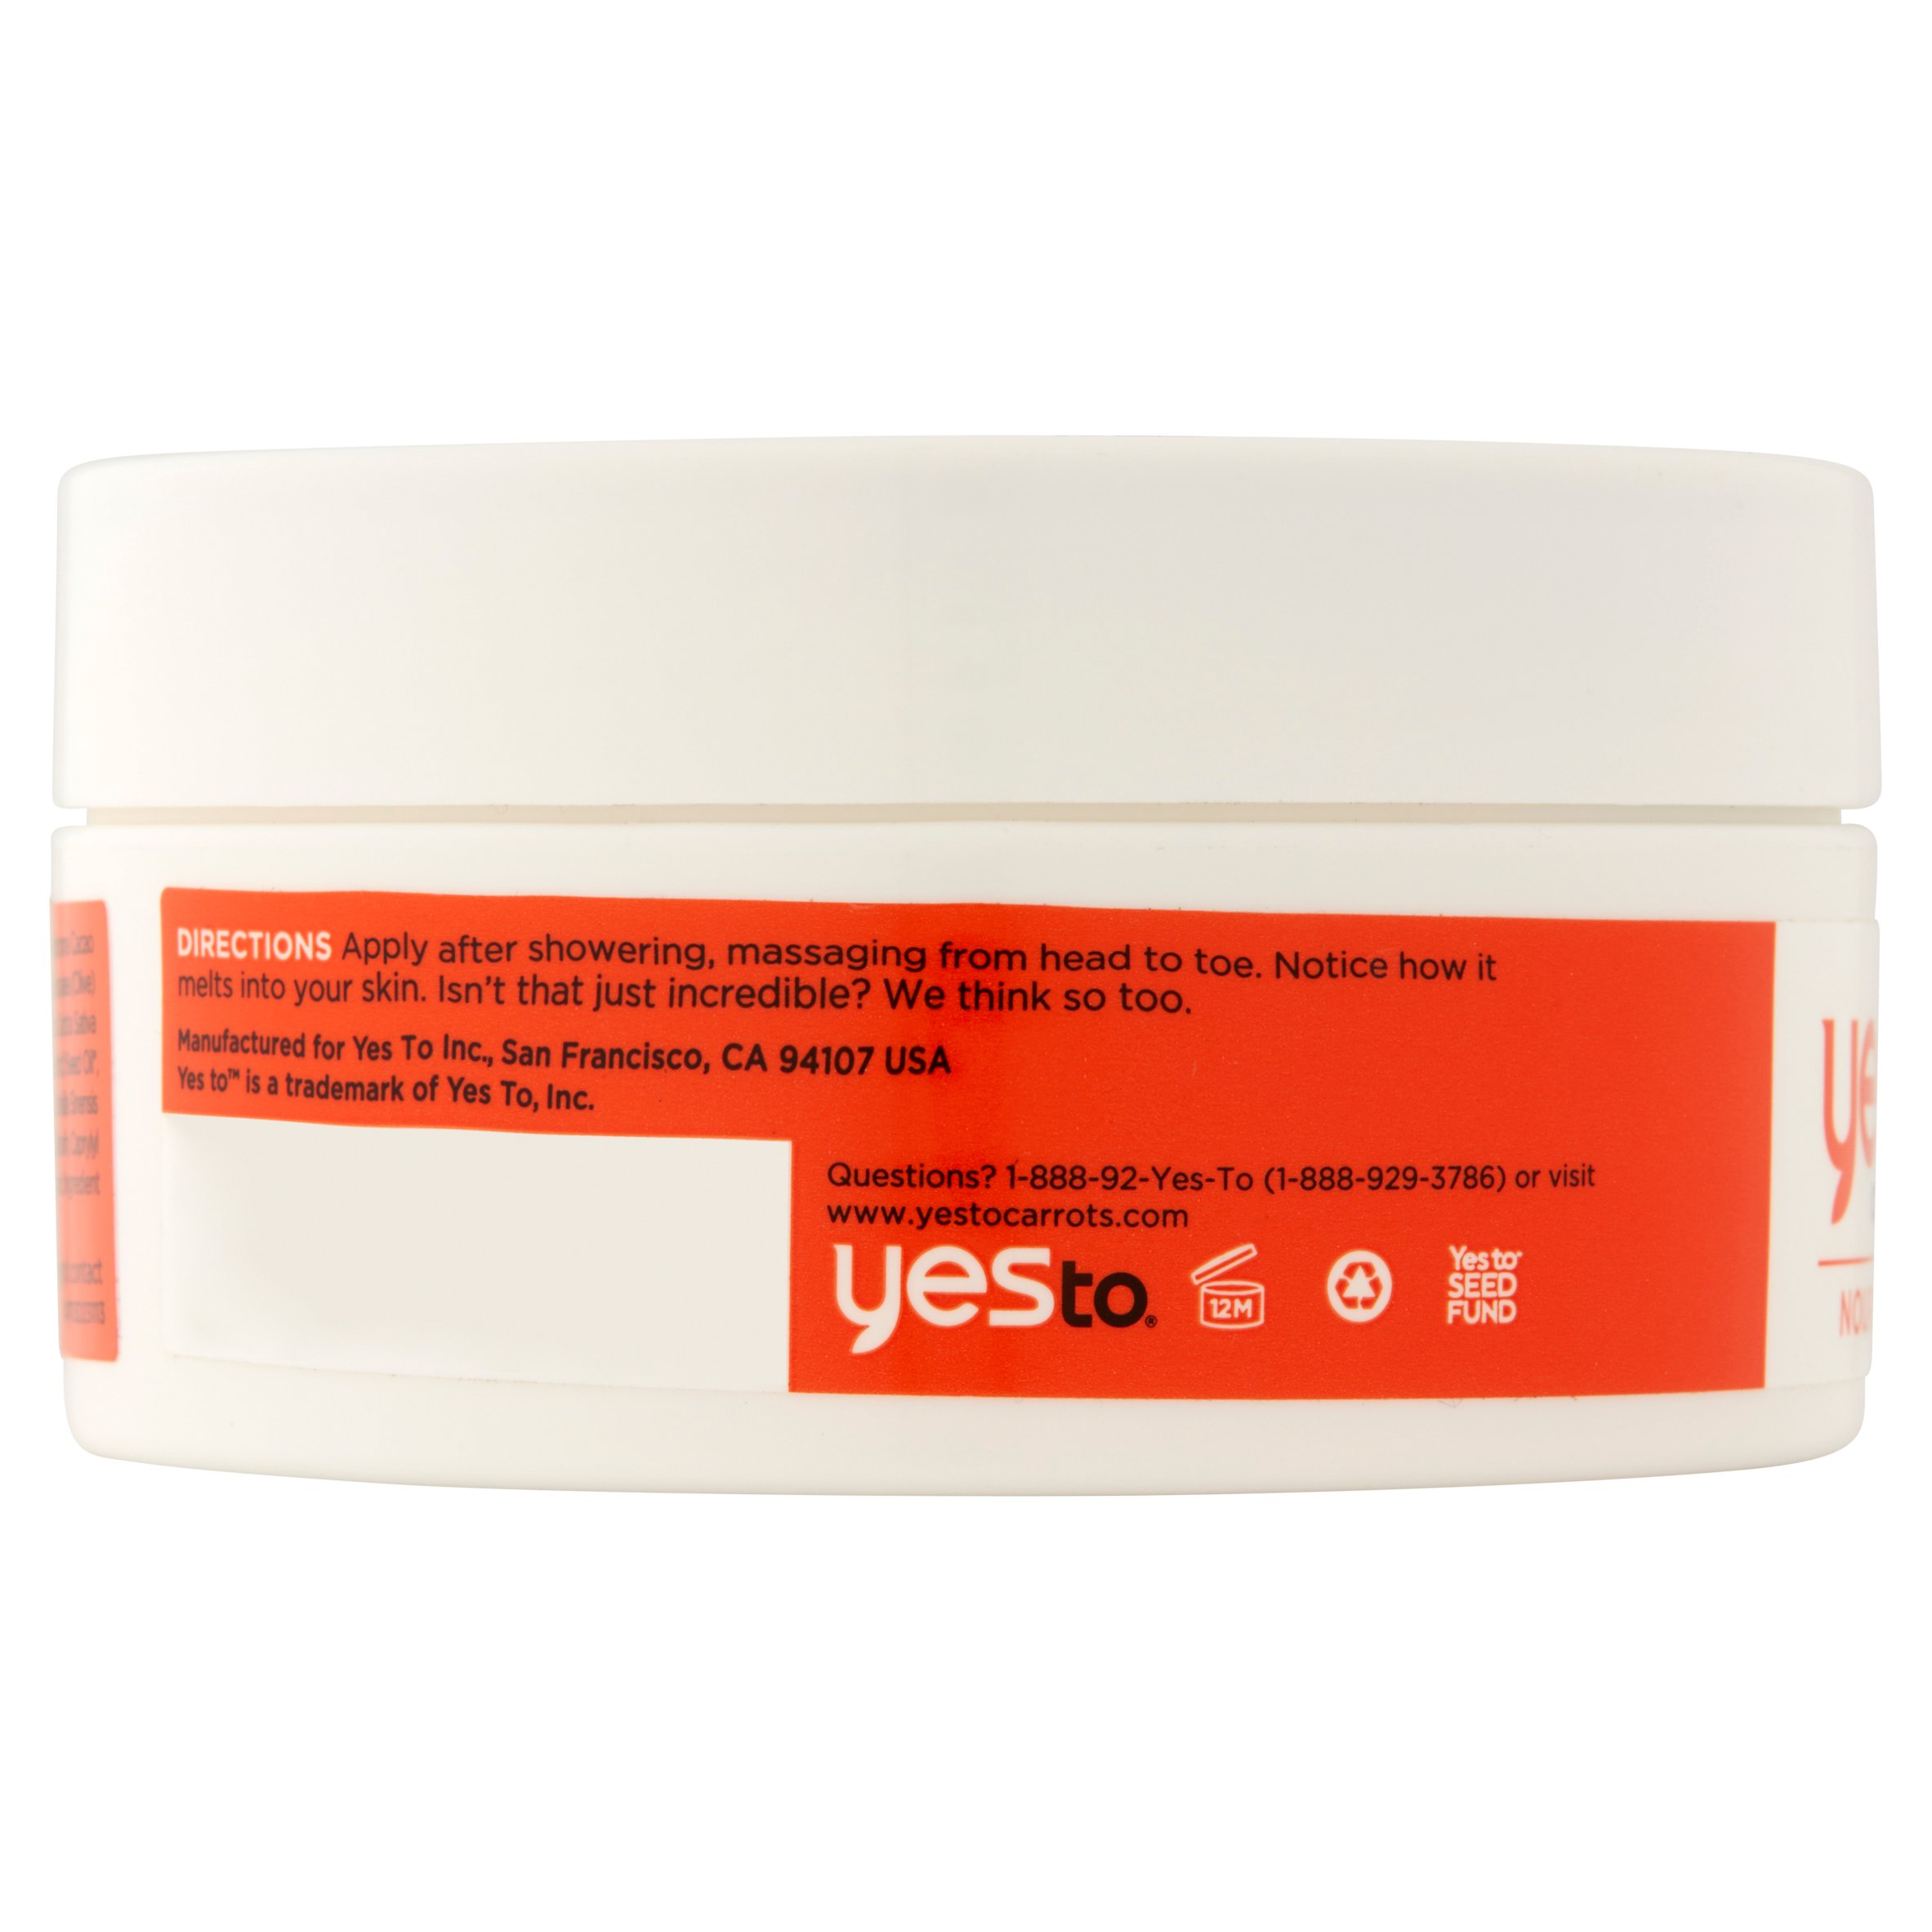 Yes To Carrots Nourishing Super Rich Body Butter 6 Oz - image 5 of 5